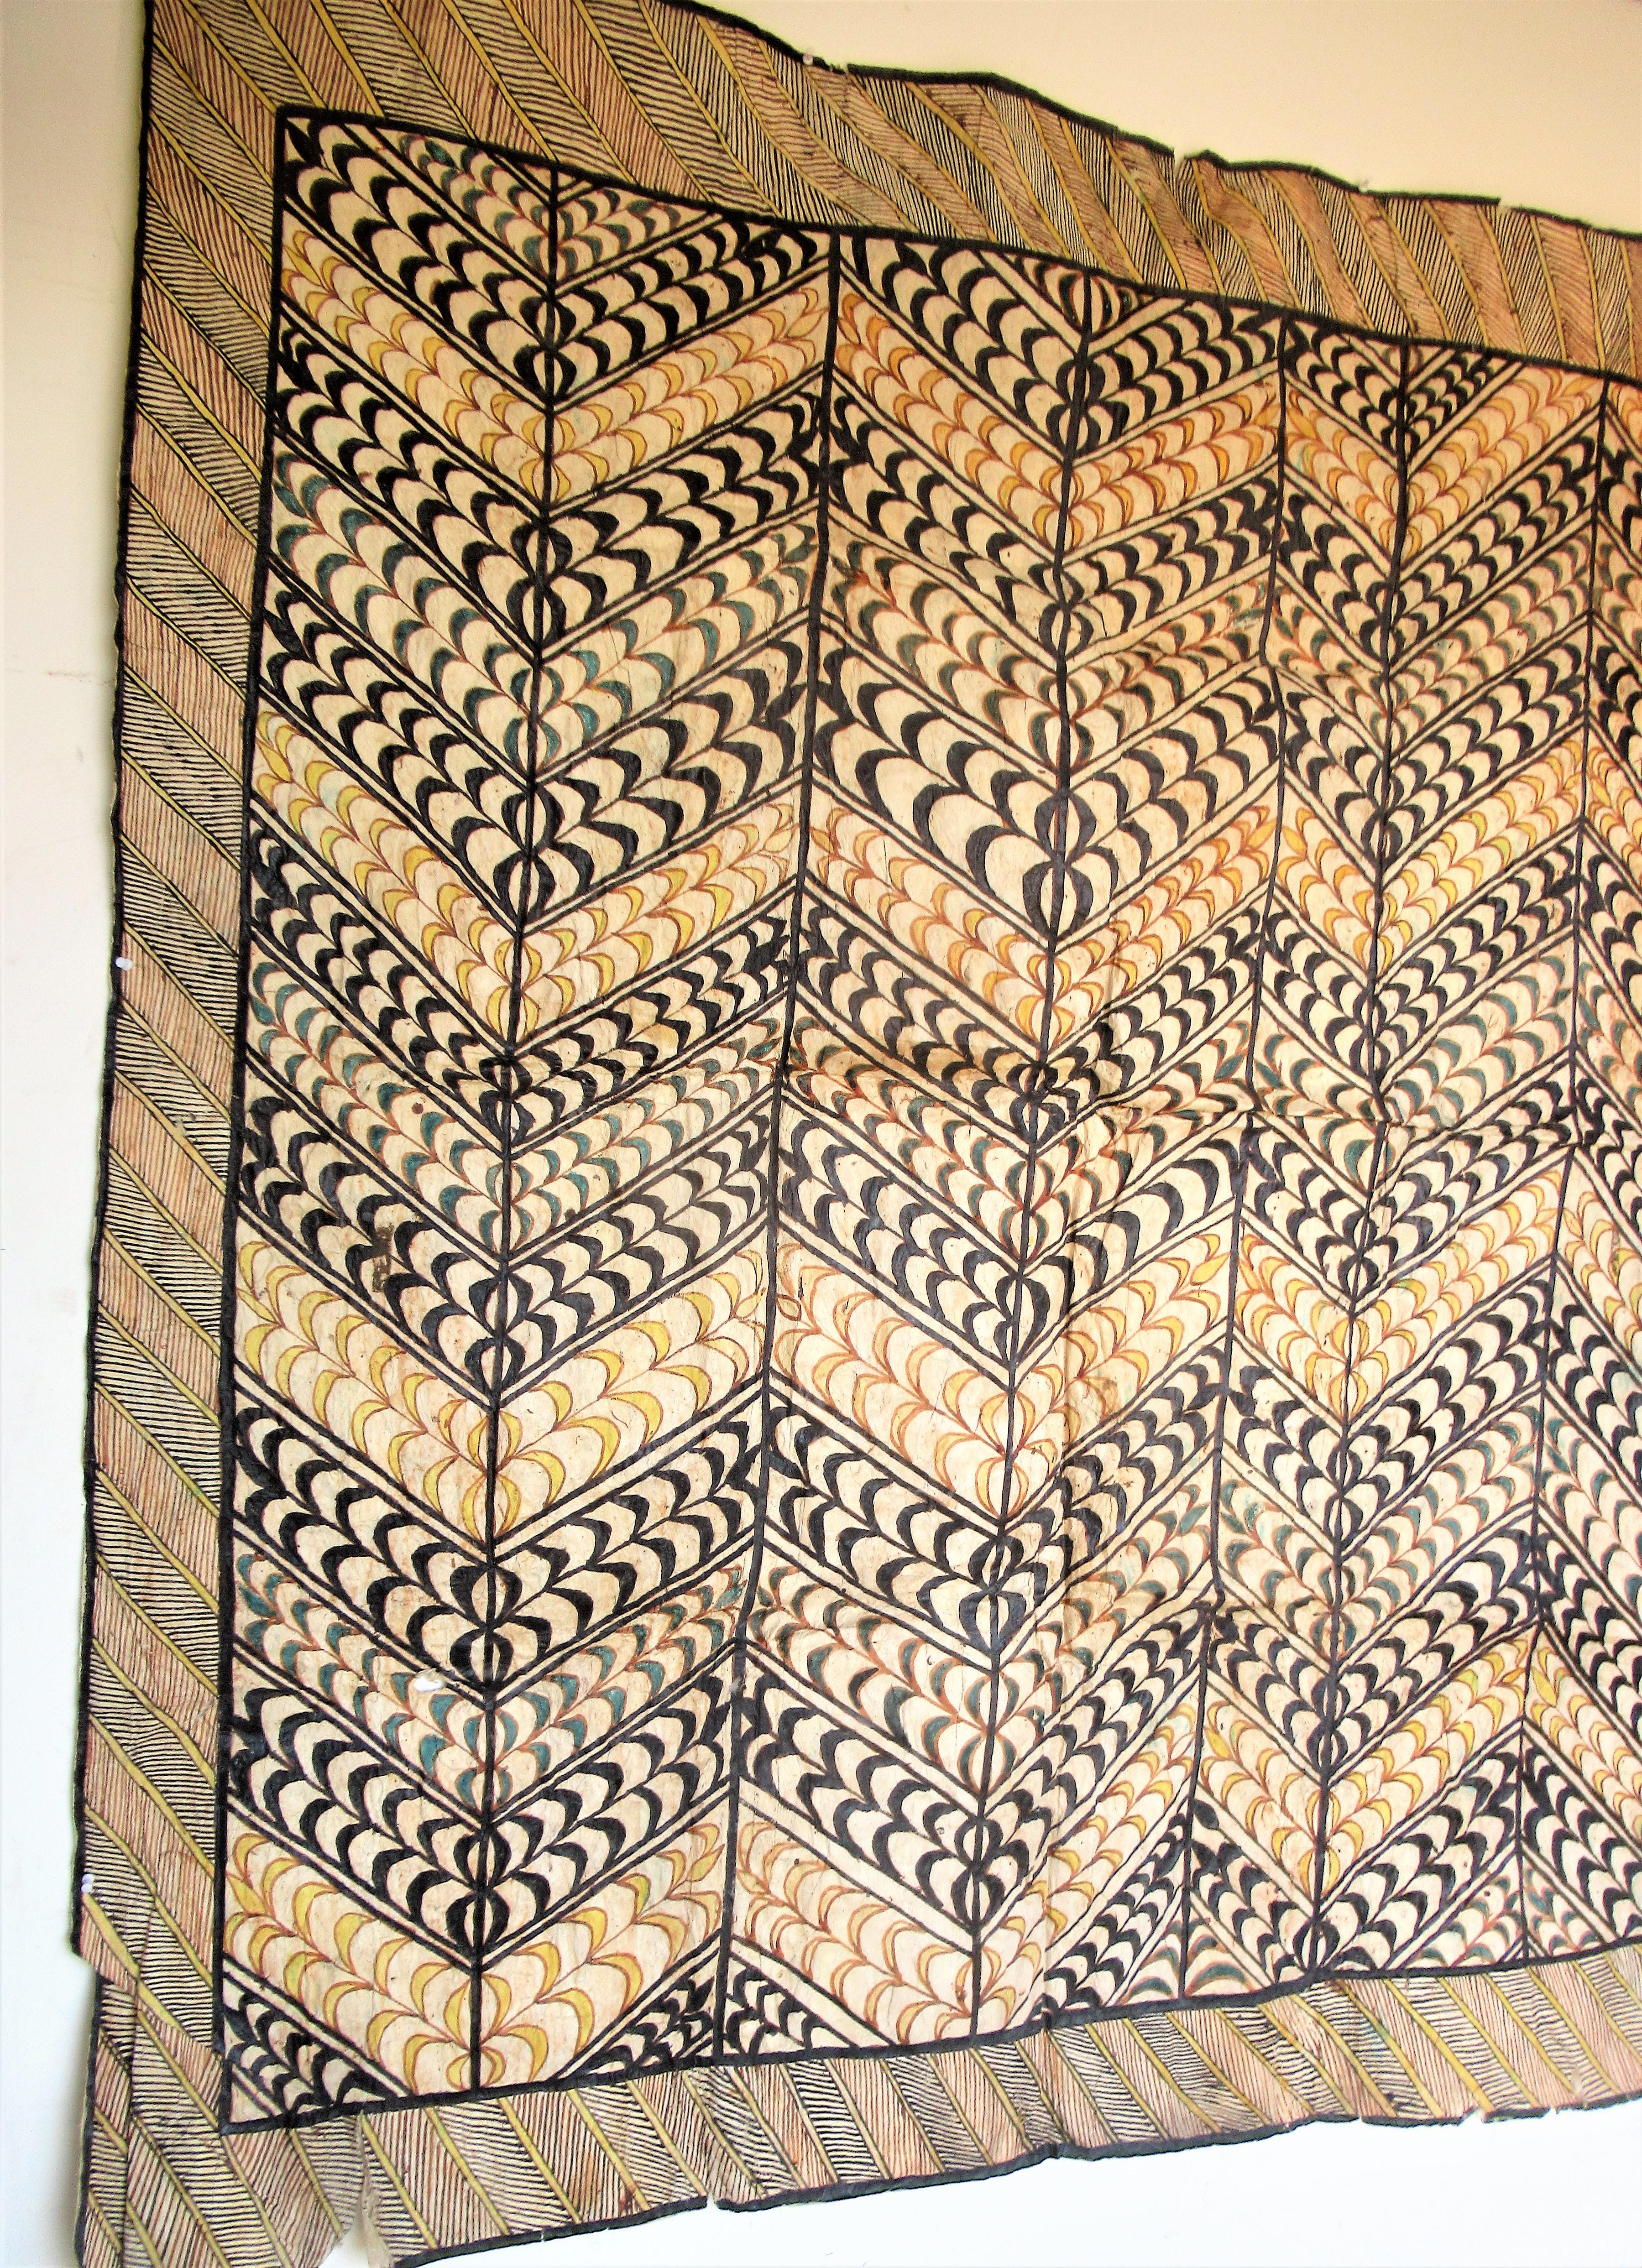 Painted Antique 19th Century Tapa Cloth